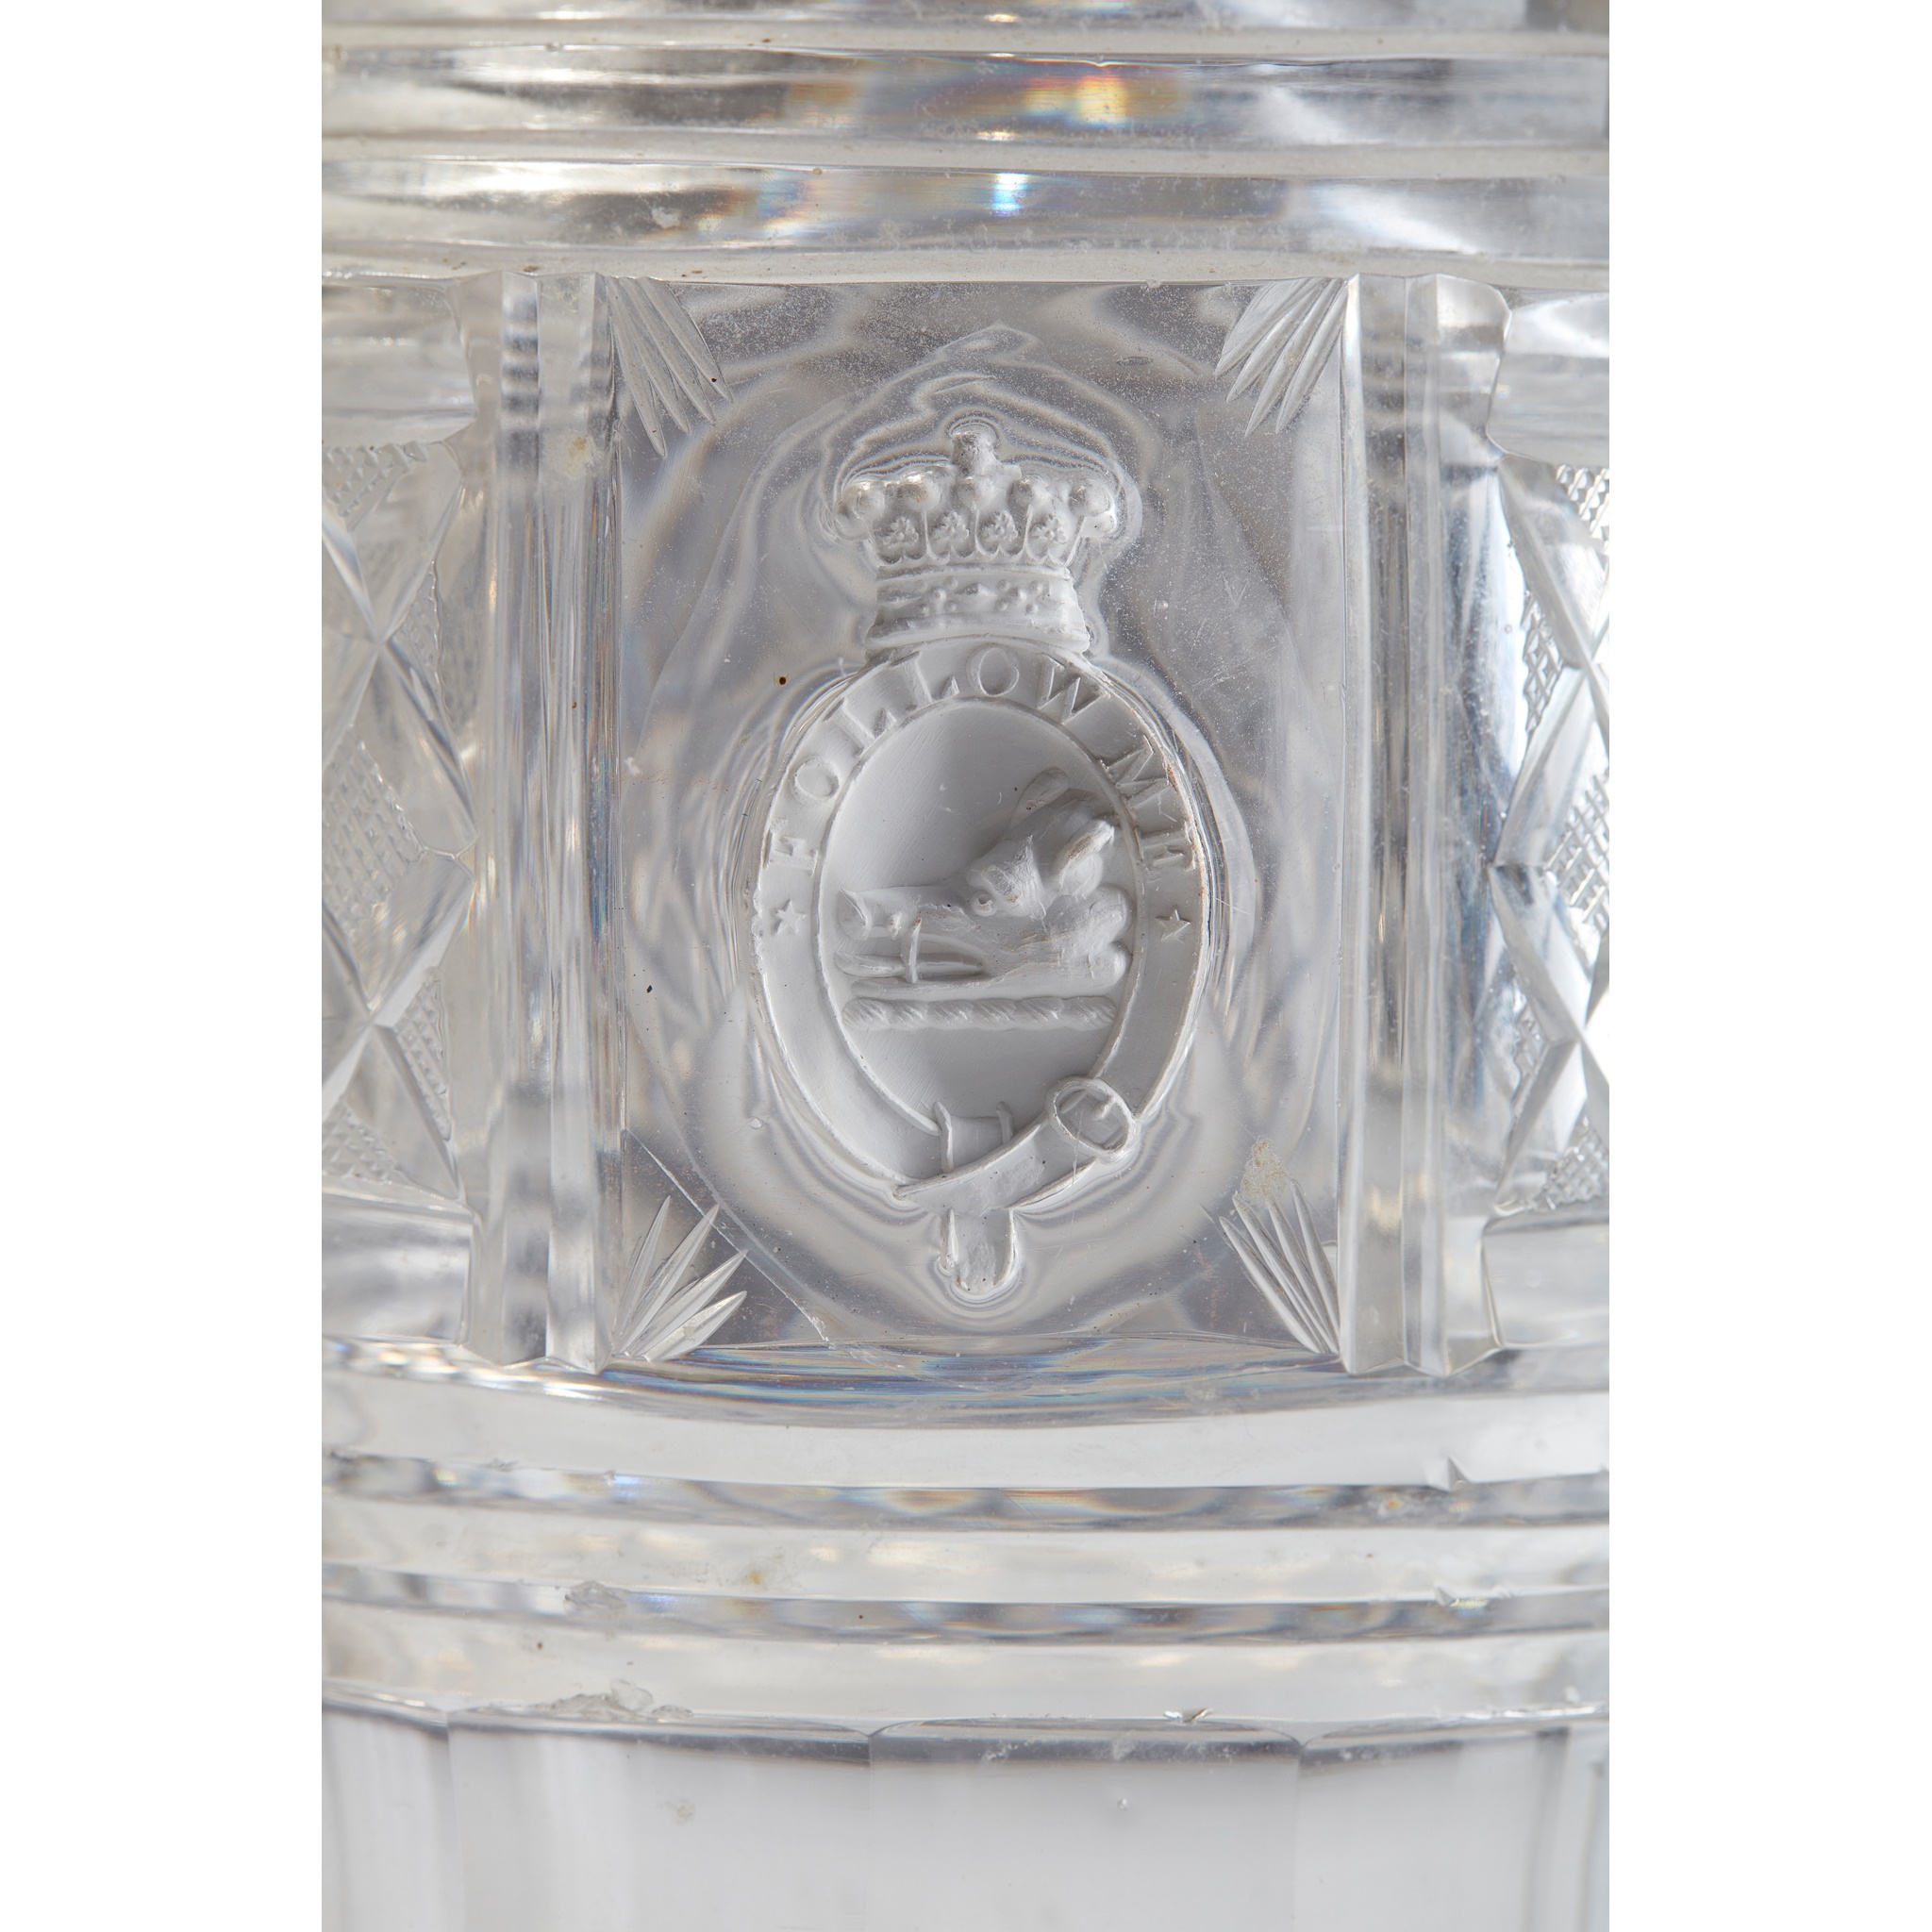 PAIR OF FULL BOTTLE DECANTERS BEARING THE BREADALBANE CREST AND MOTTO EARLY 19TH CENTURY - Image 4 of 8